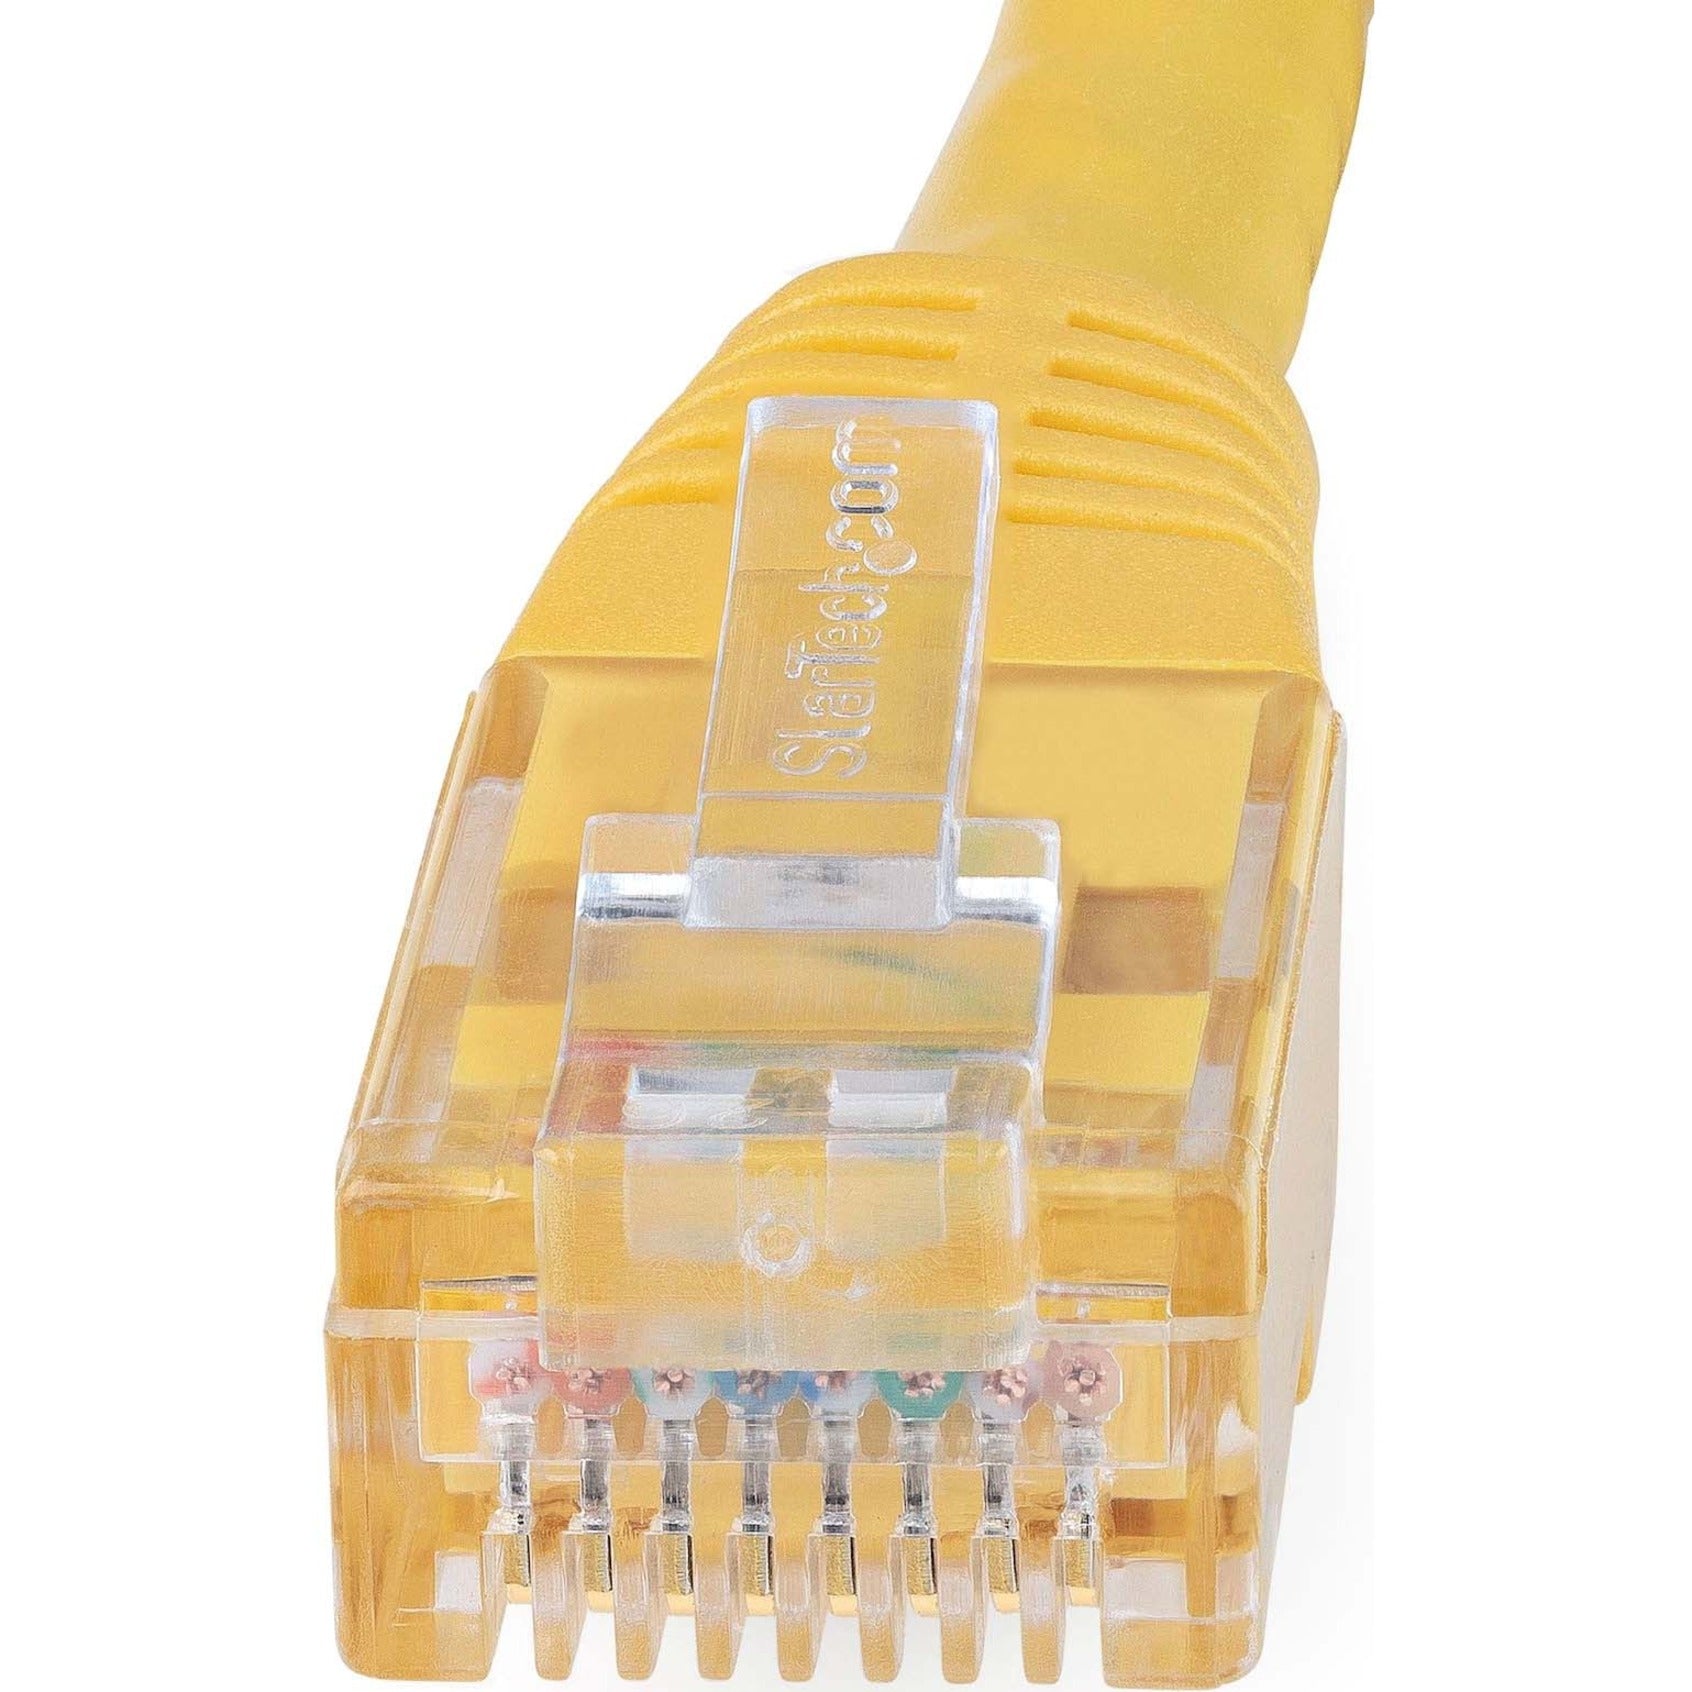 StarTech.com C6PATCH25YL 25ft Yellow Cat6 UTP Patch Cable ETL Verified, 10 Gbit/s Data Transfer Rate, Gold Plated Connectors, Snagless Boot